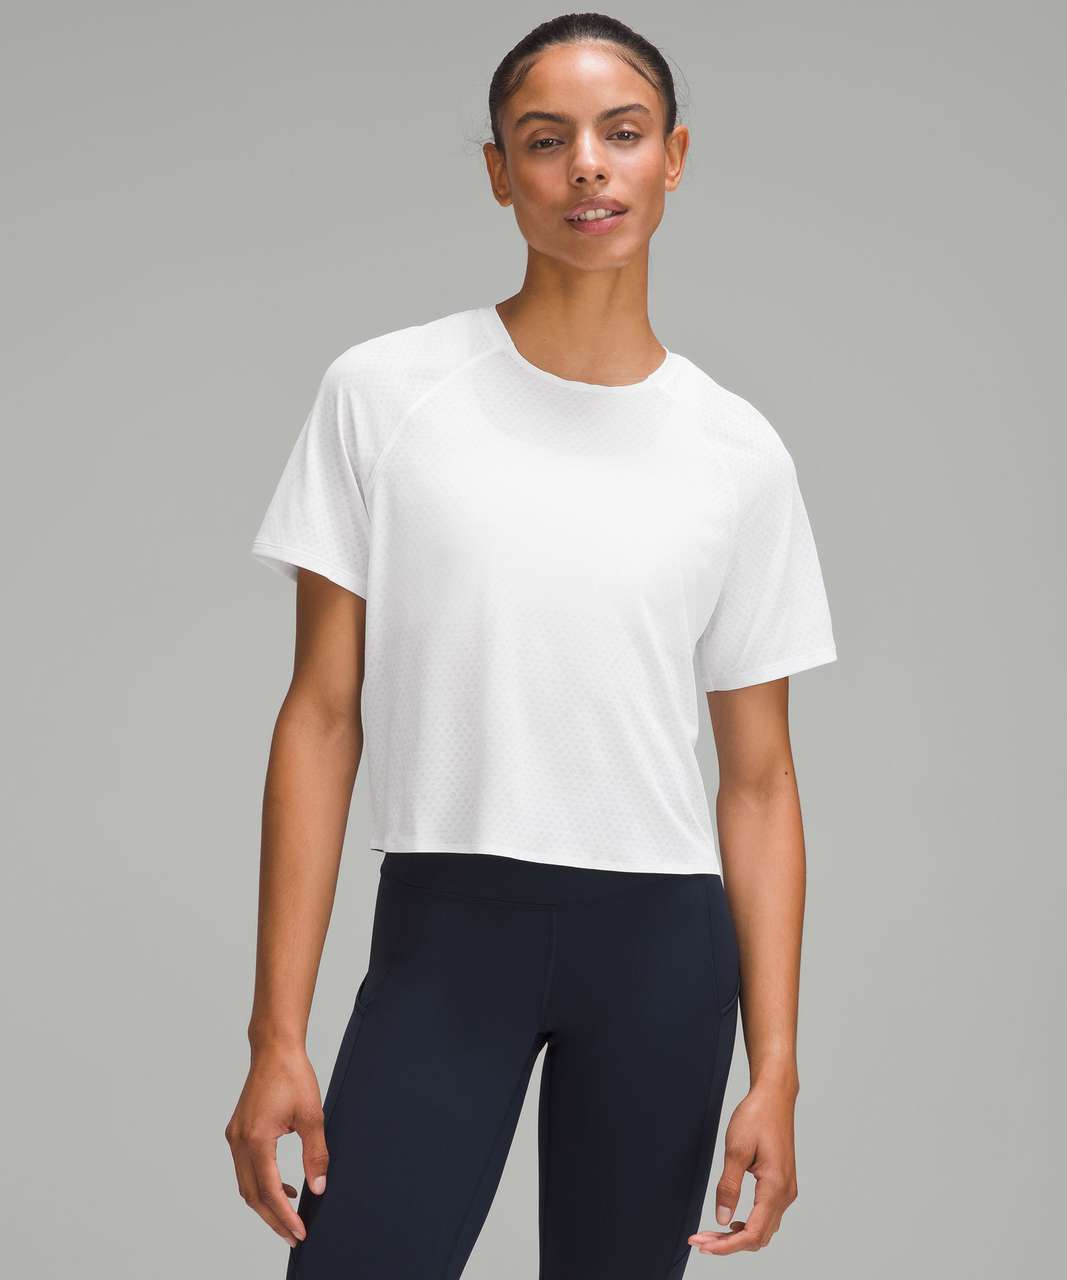 Lululemon athletica Fast and Free Race Length T-Shirt